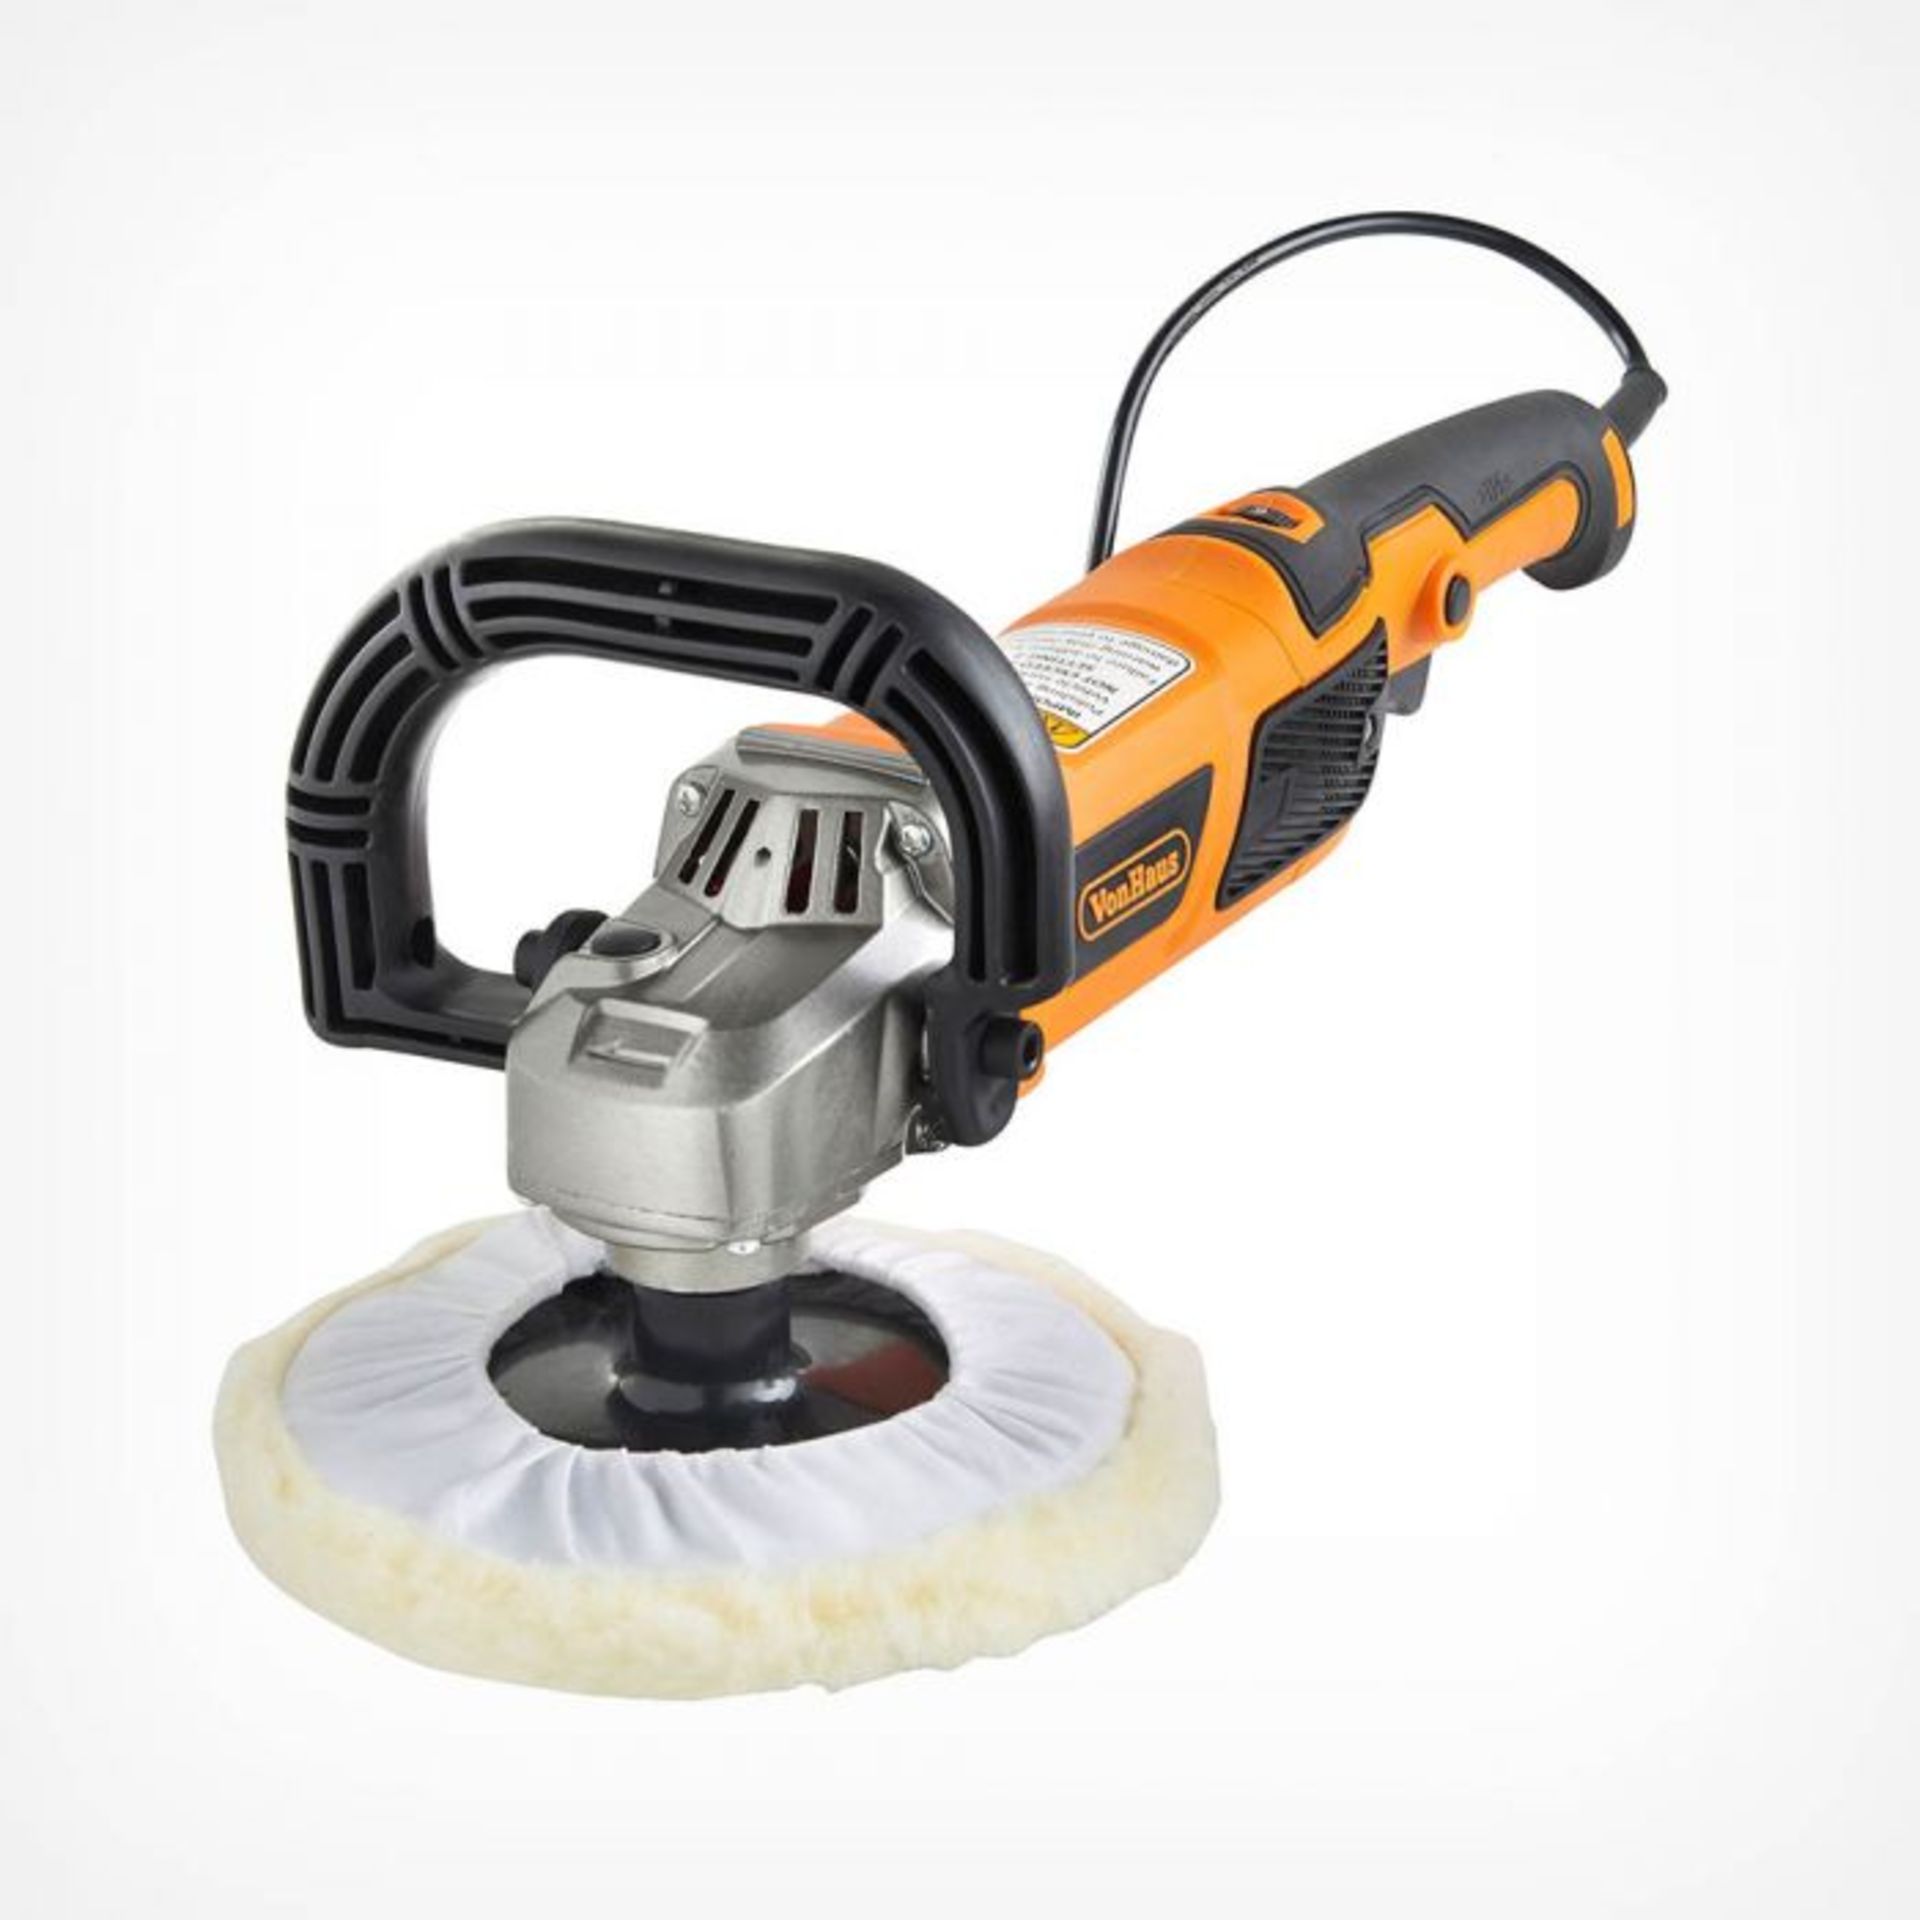 Polisher & Sander 1200W. If you love spending time keeping your beloved possessions buffed to a